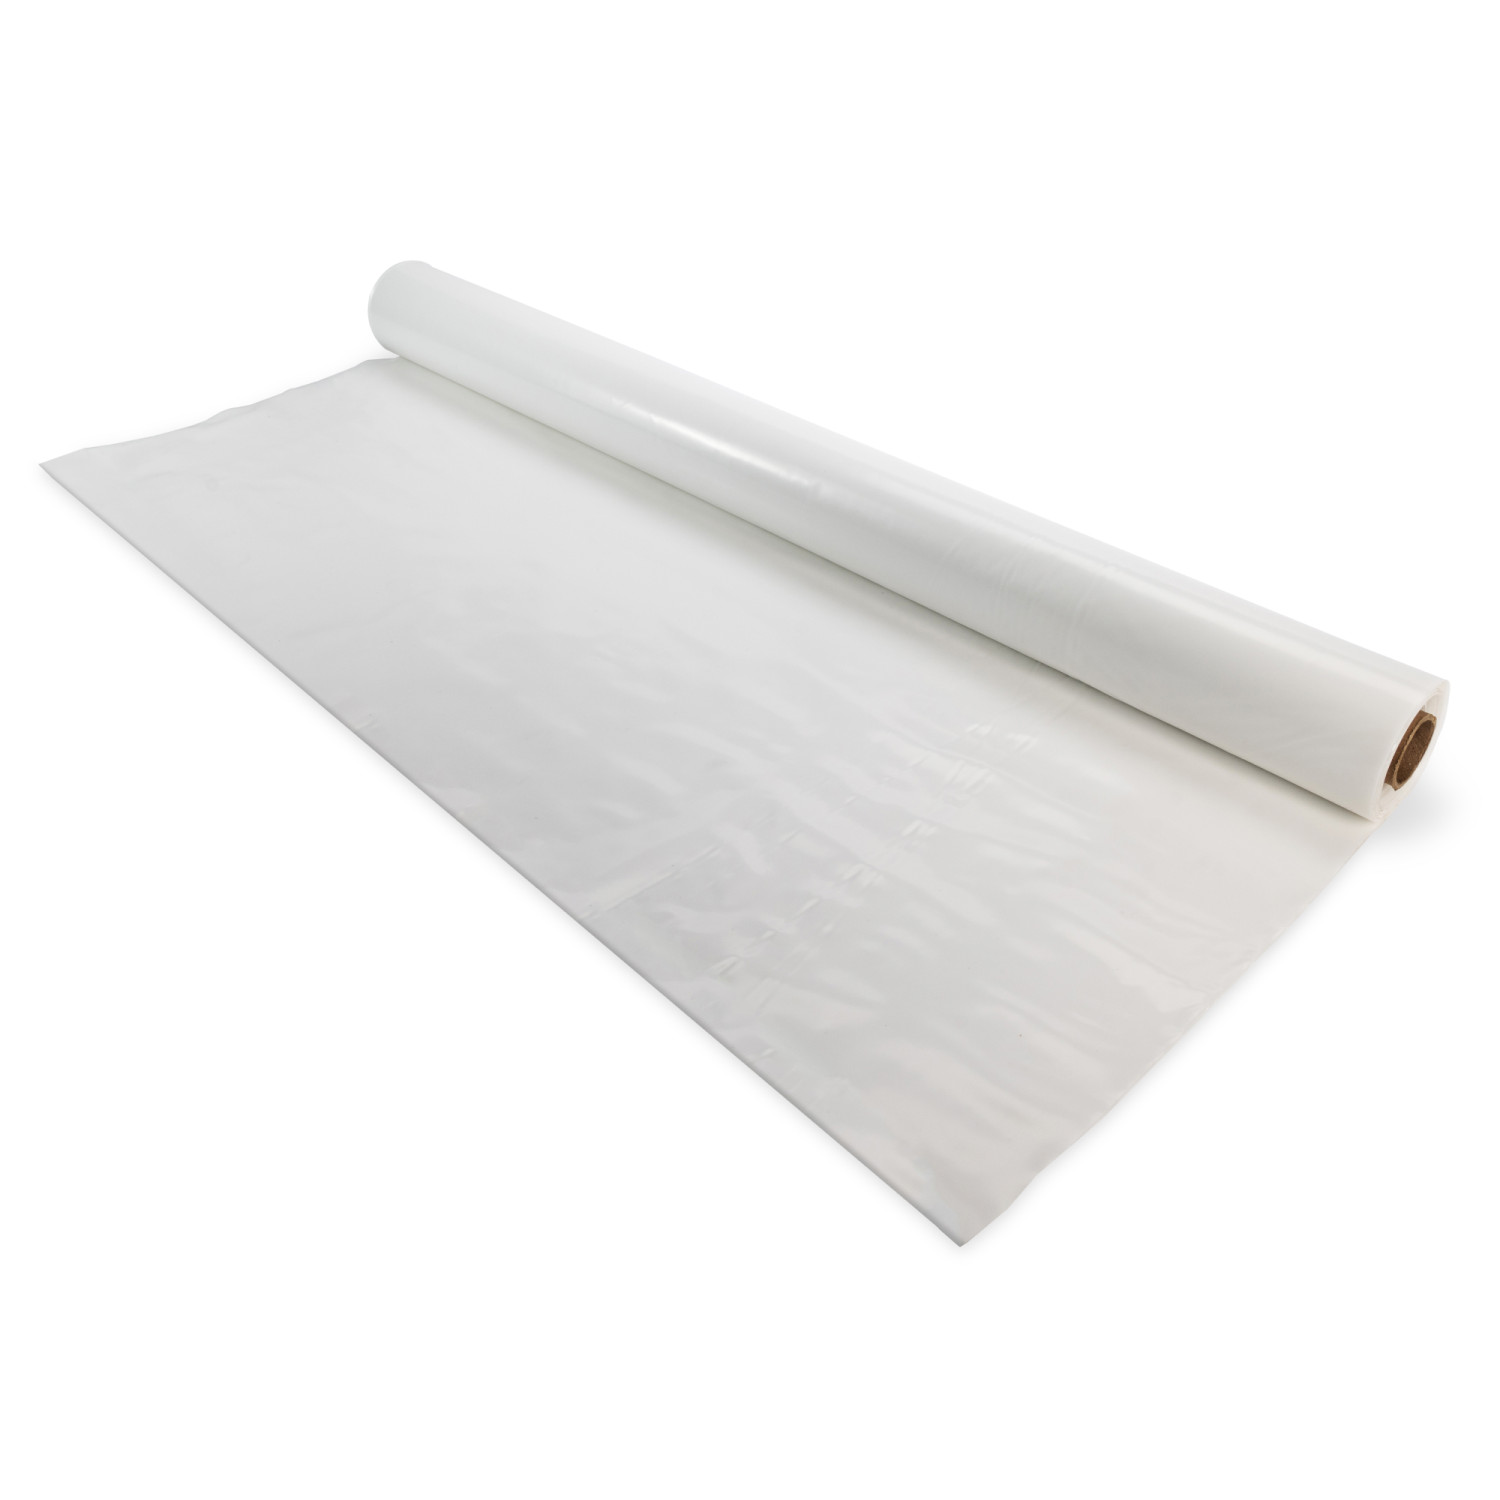 https://idlpack.com/image/cache/catalog/Products/Plastic%20Sheeting/2000%20px_Construction-Clear-4mil-6x50-14_white_bg%201-1500x1500.jpg